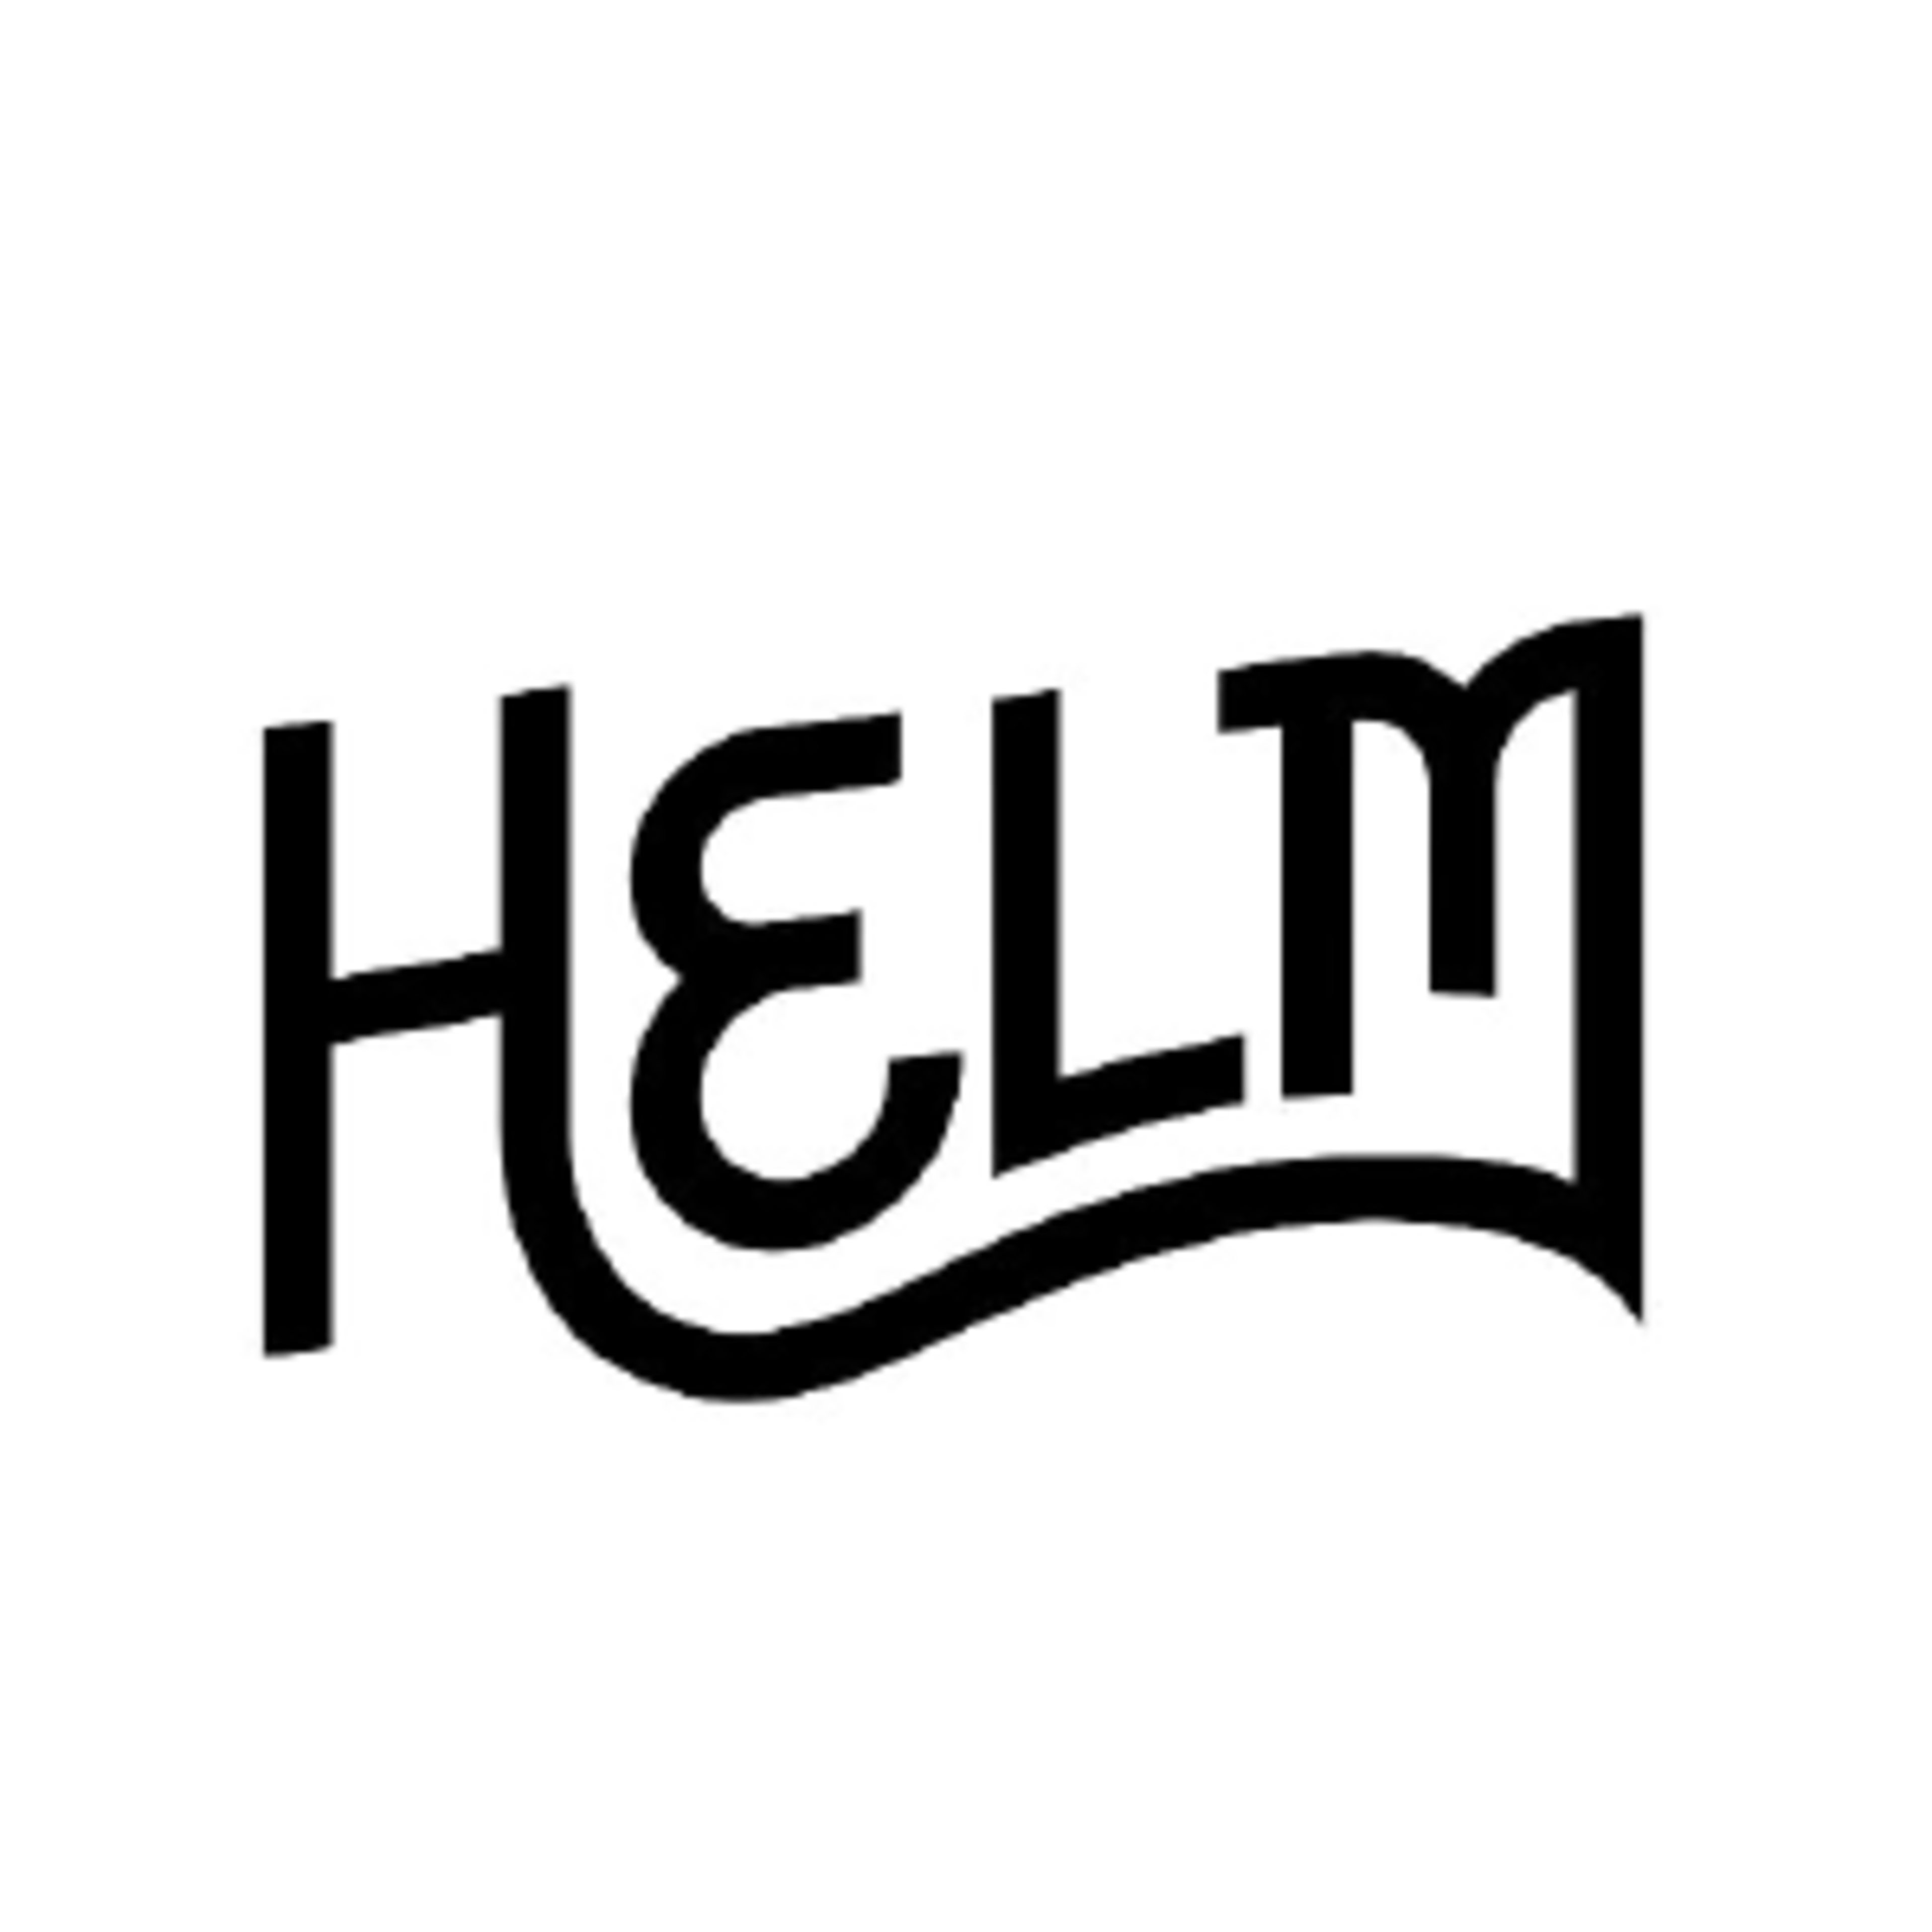 HELM BootsCode